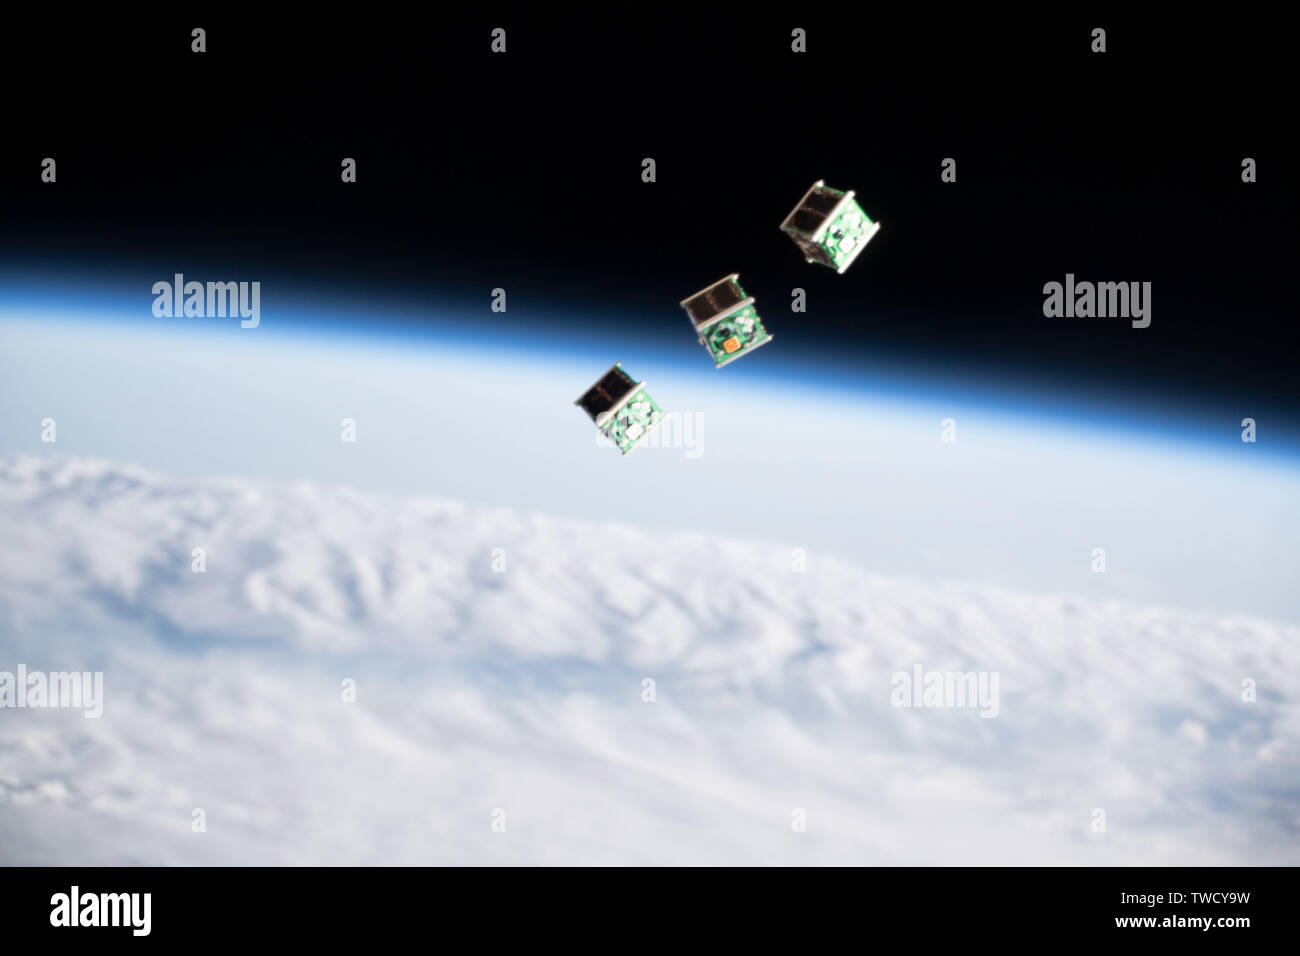 A set of tiny satellite sfrom Singapore, also known as a CubeSat, is ejected from the Japanese Small Satellite Orbital Deployer on the International Space Station June 17, 2019 in Earth Orbit. Stock Photo